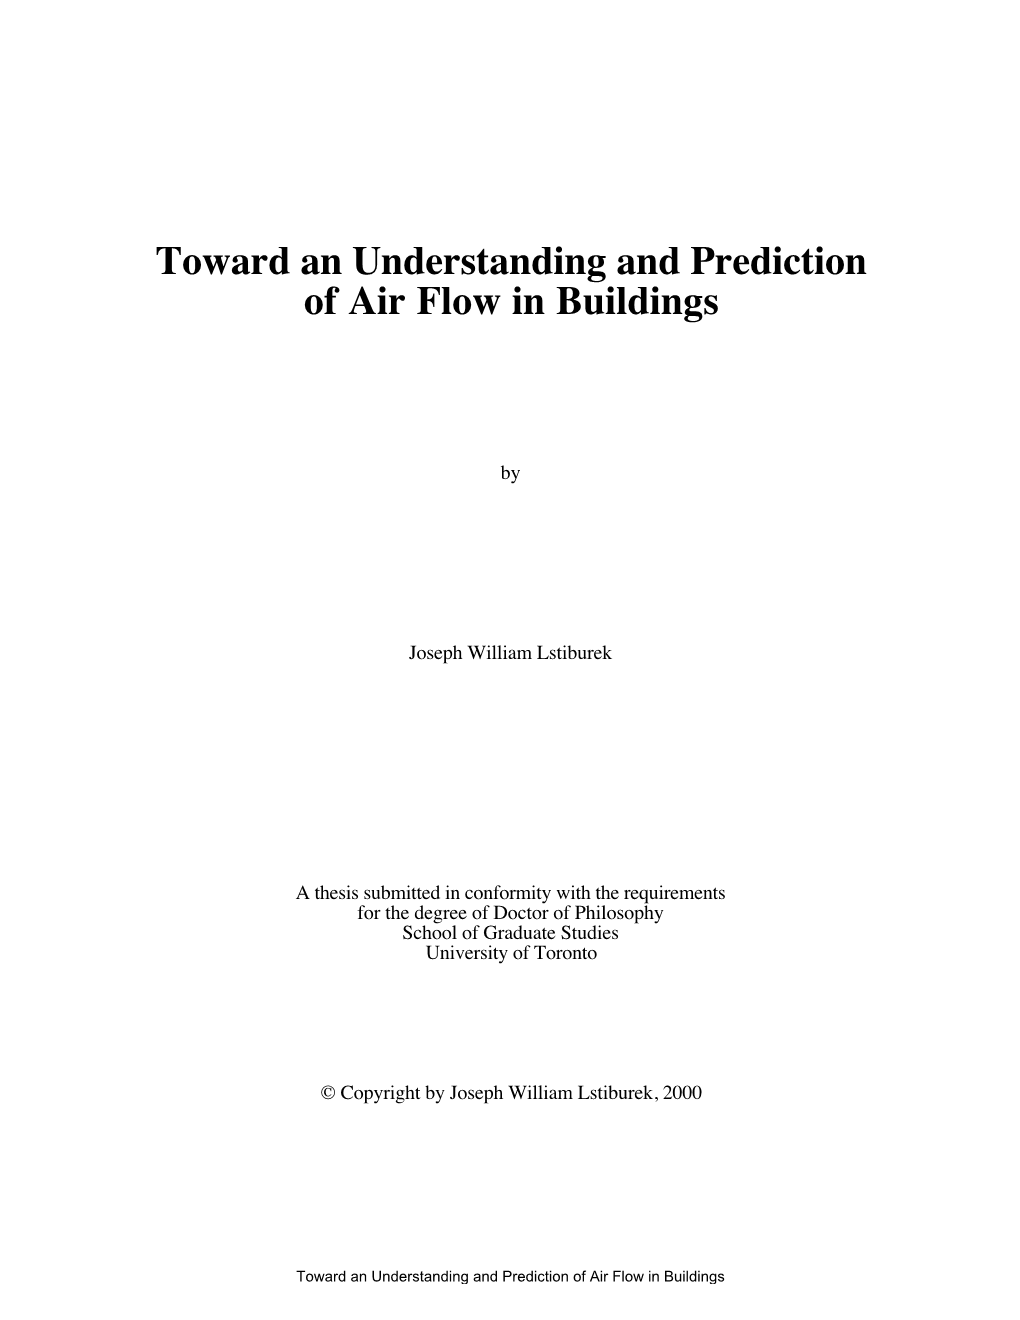 Toward an Understanding and Prediction of Air Flow in Buildings